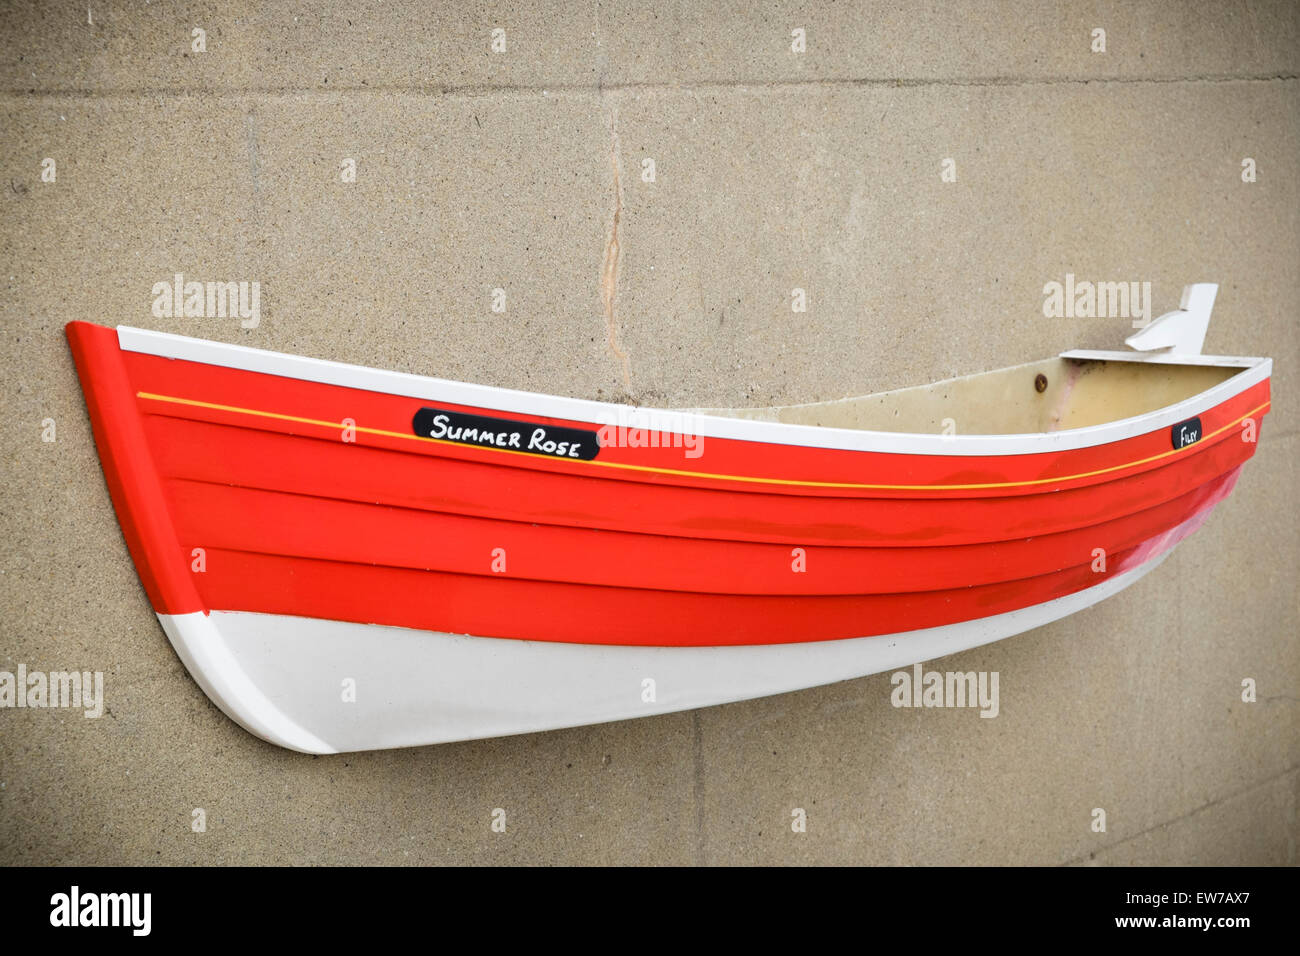 Wall planter as boat Stock Photo